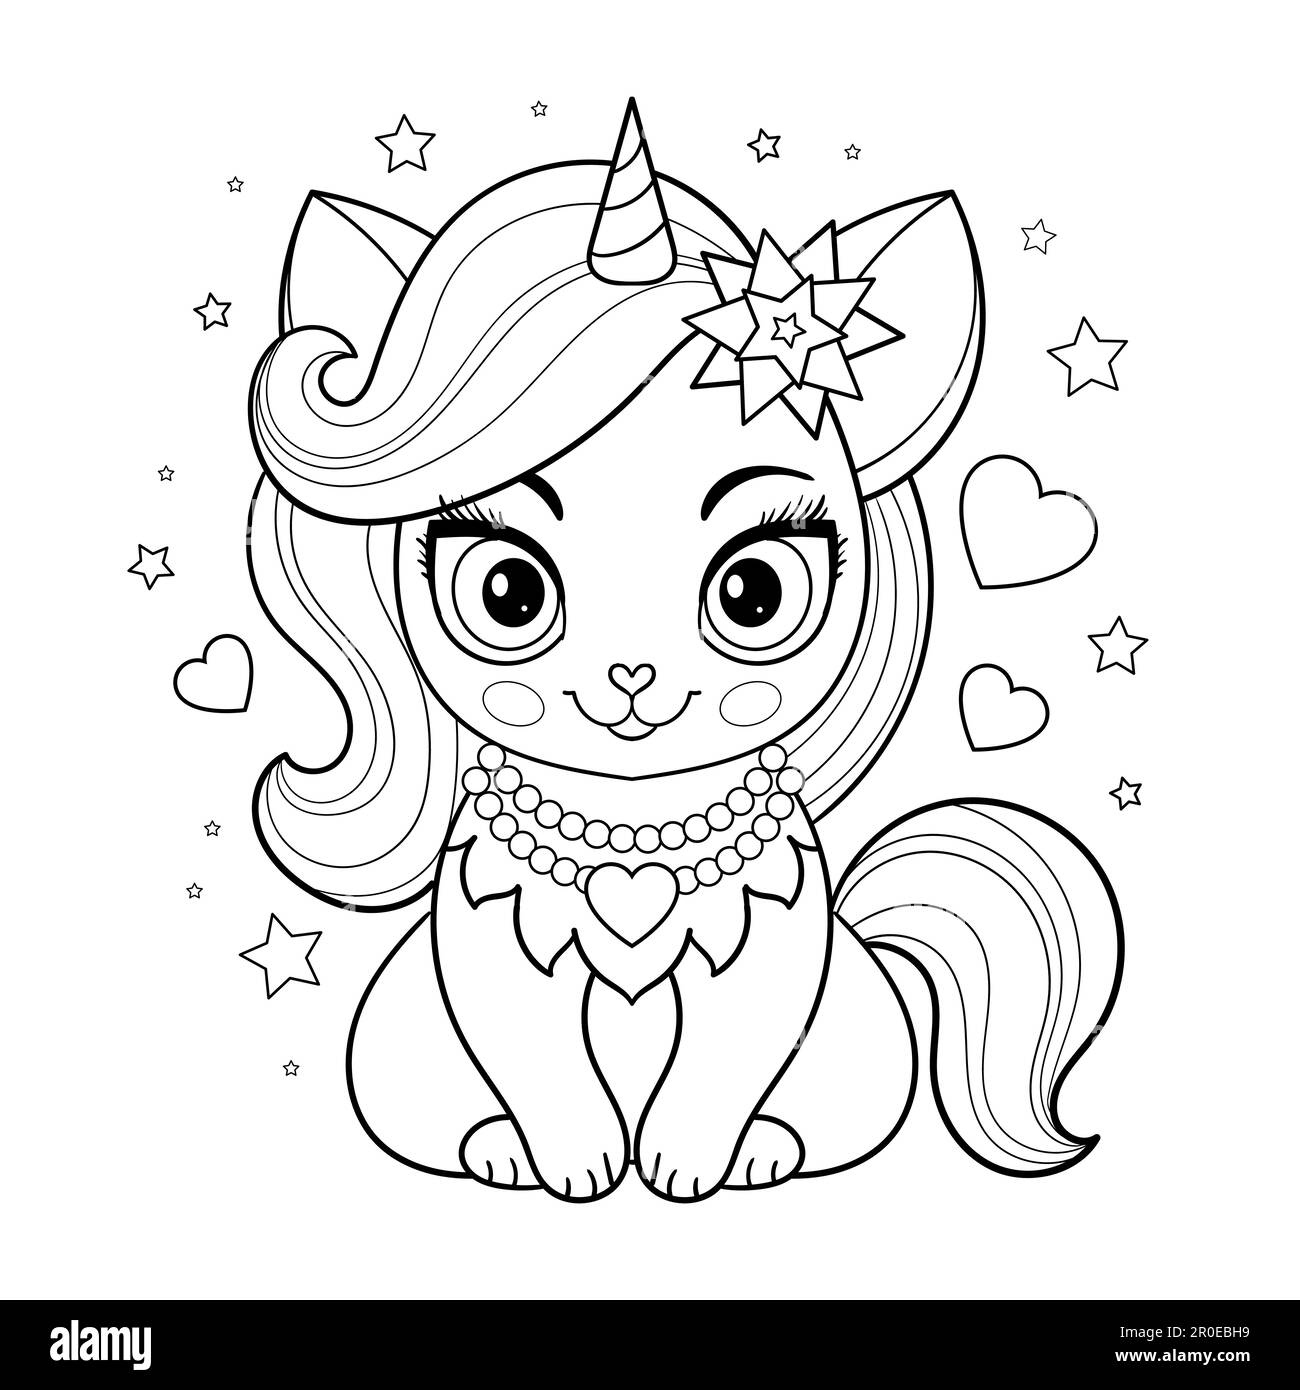 Beautiful cat unicorn. Black and white linear drawing. Fairy tale character. For children's coloring books, prints, posters, cards, stickers, and so o Stock Vector